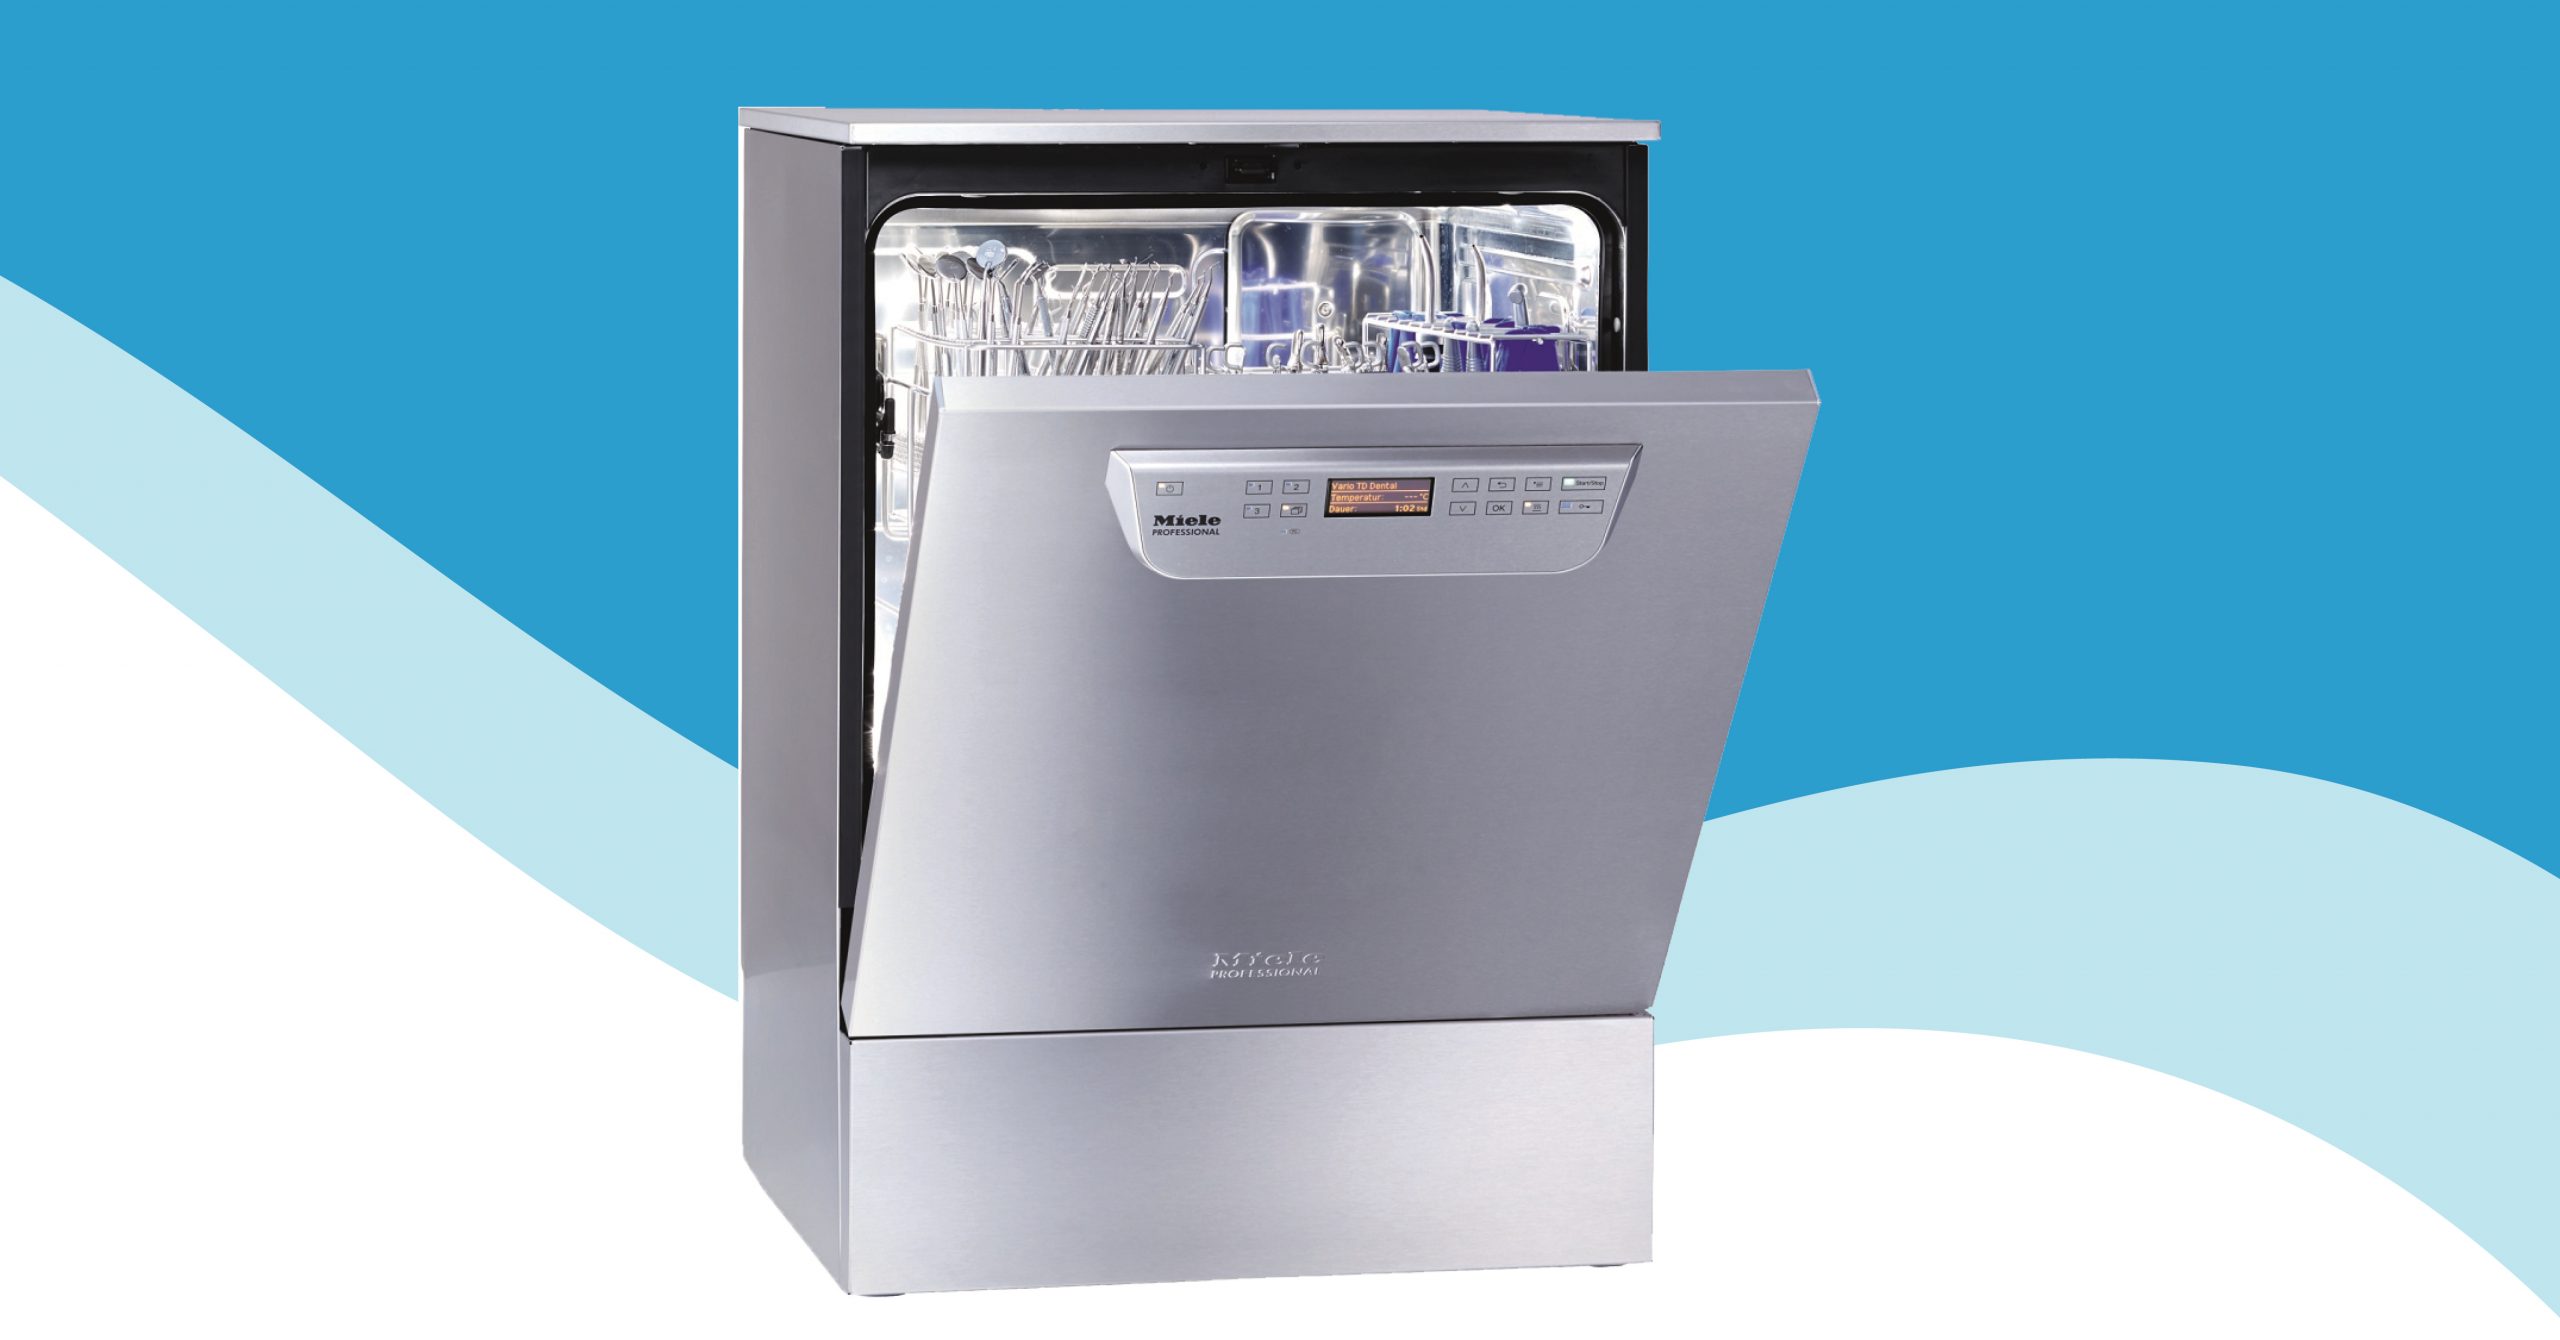 The Miele Thermal Washer Disinfector